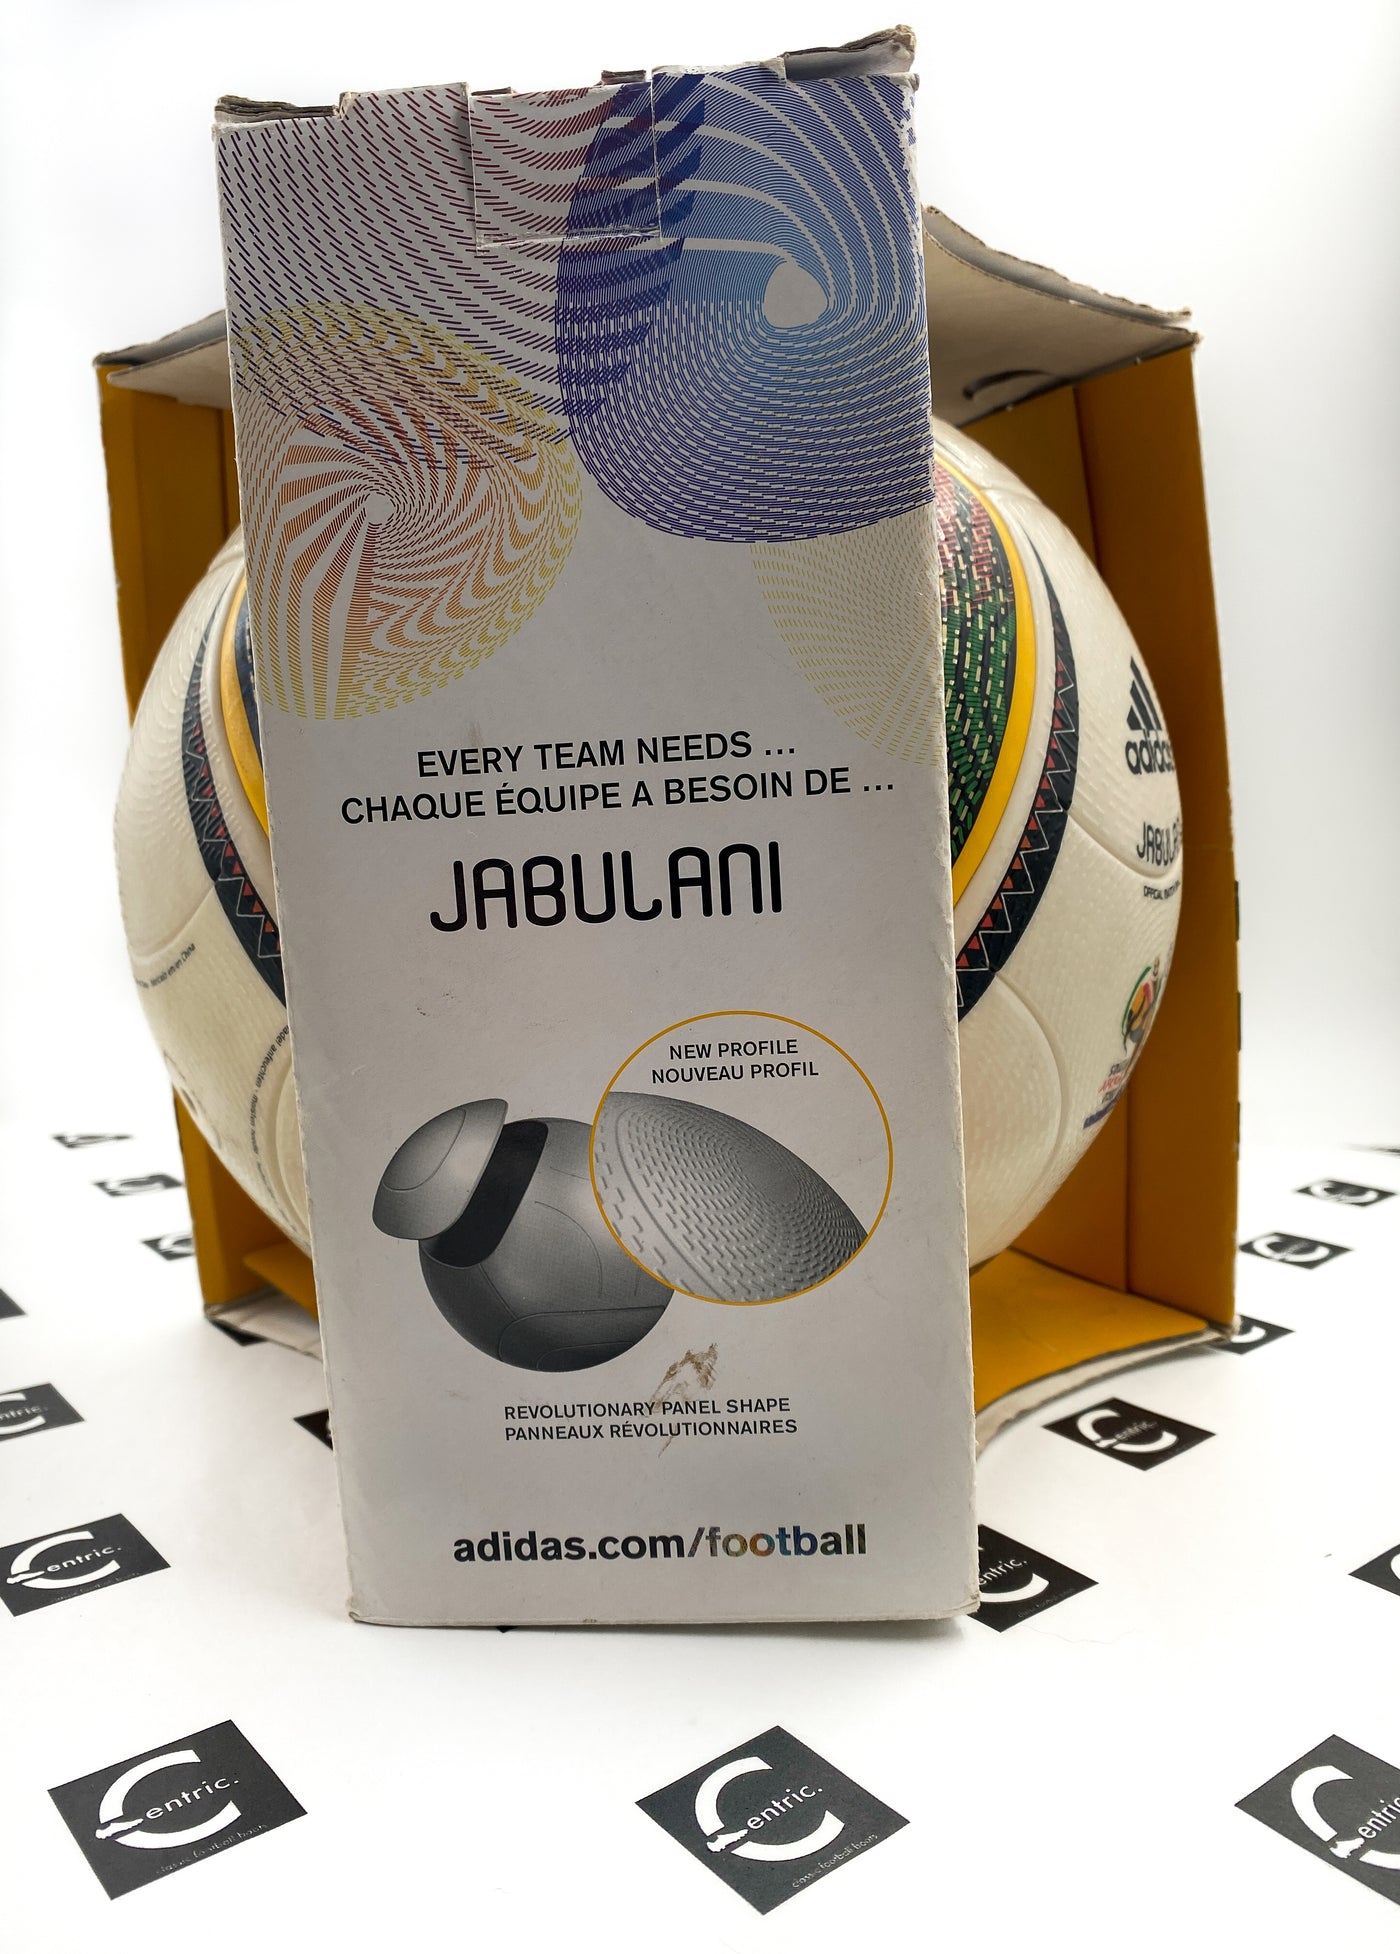 Adidas Jabulani Official Match Ball 2010 Fifa World Cup Brand New In Packaging - Bootscentric